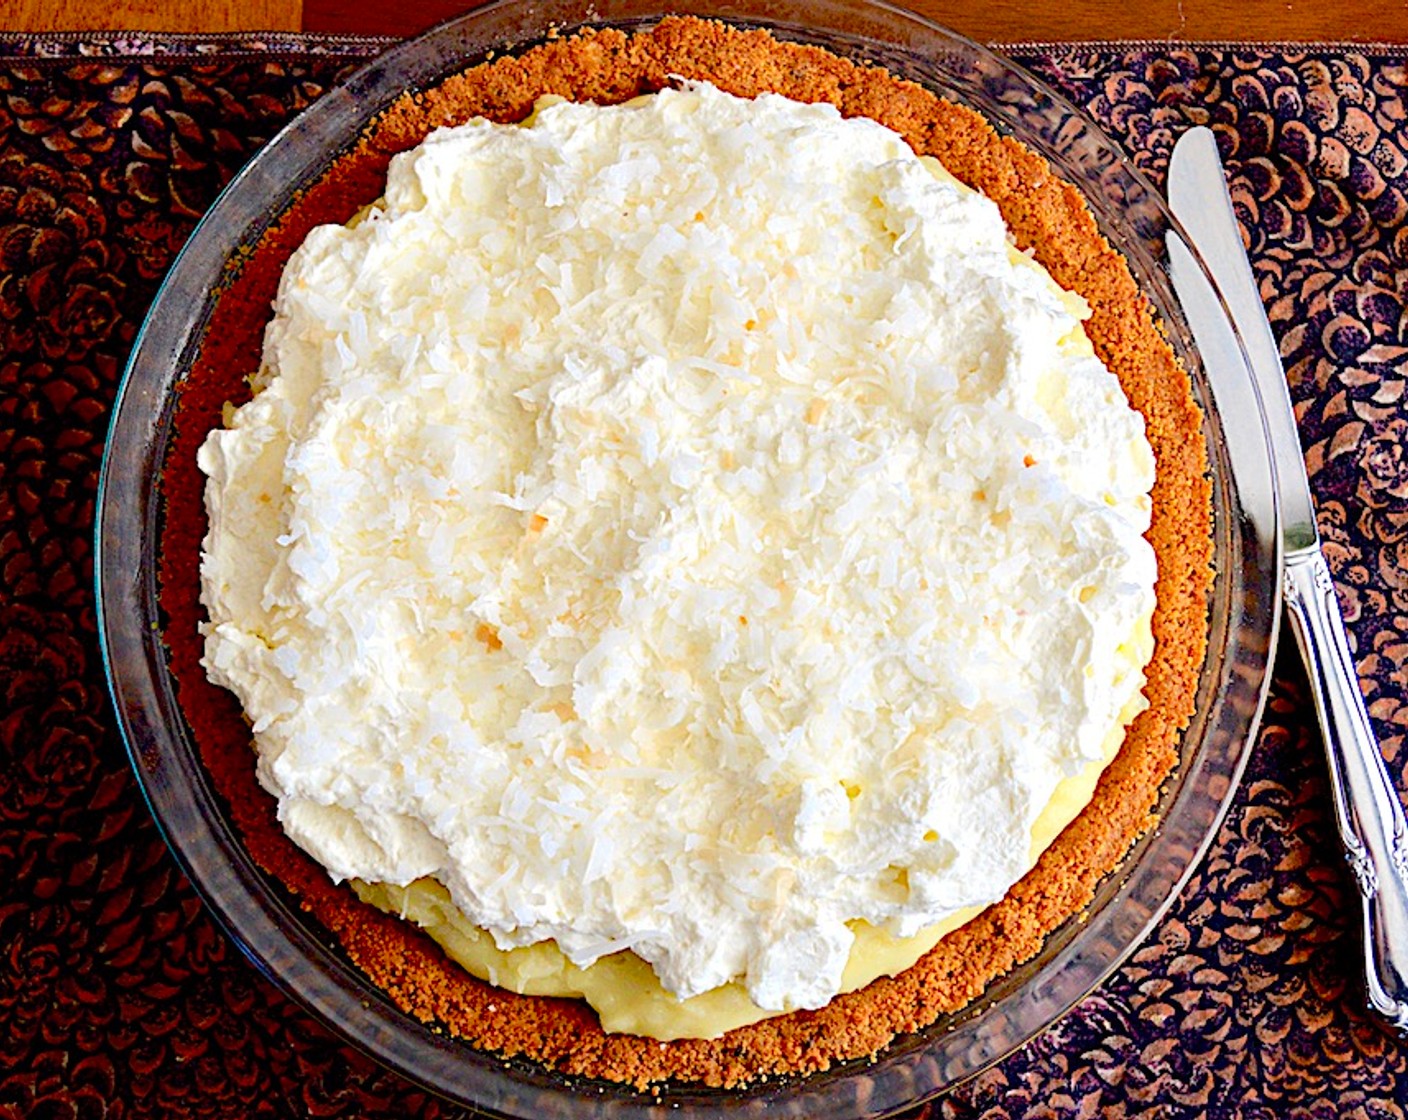 step 8 Spread the coconut cream evenly in the cooled graham cracker crust and chill the pie for at least 4 hours. Then top it with a generous layer of Whipped Cream (to taste) and sprinkle the remaining toasted coconut on the very top. Serve and enjoy!